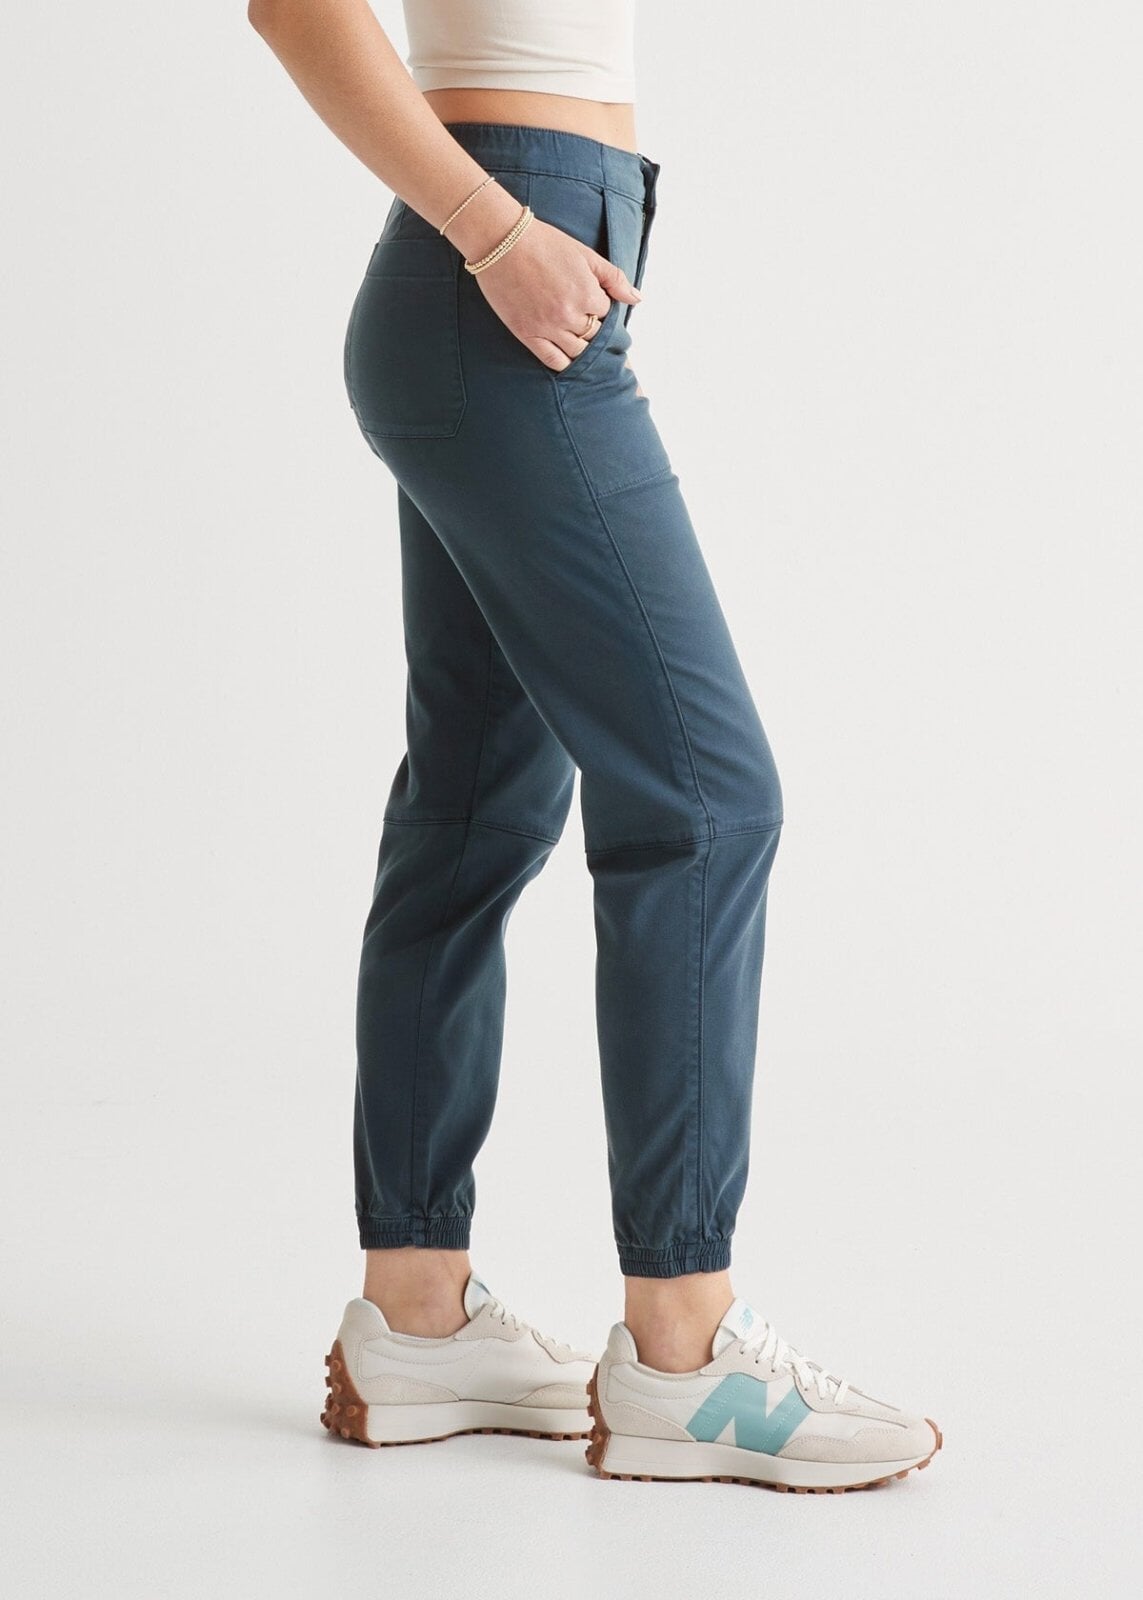 womens high rise blue athletic jogger side